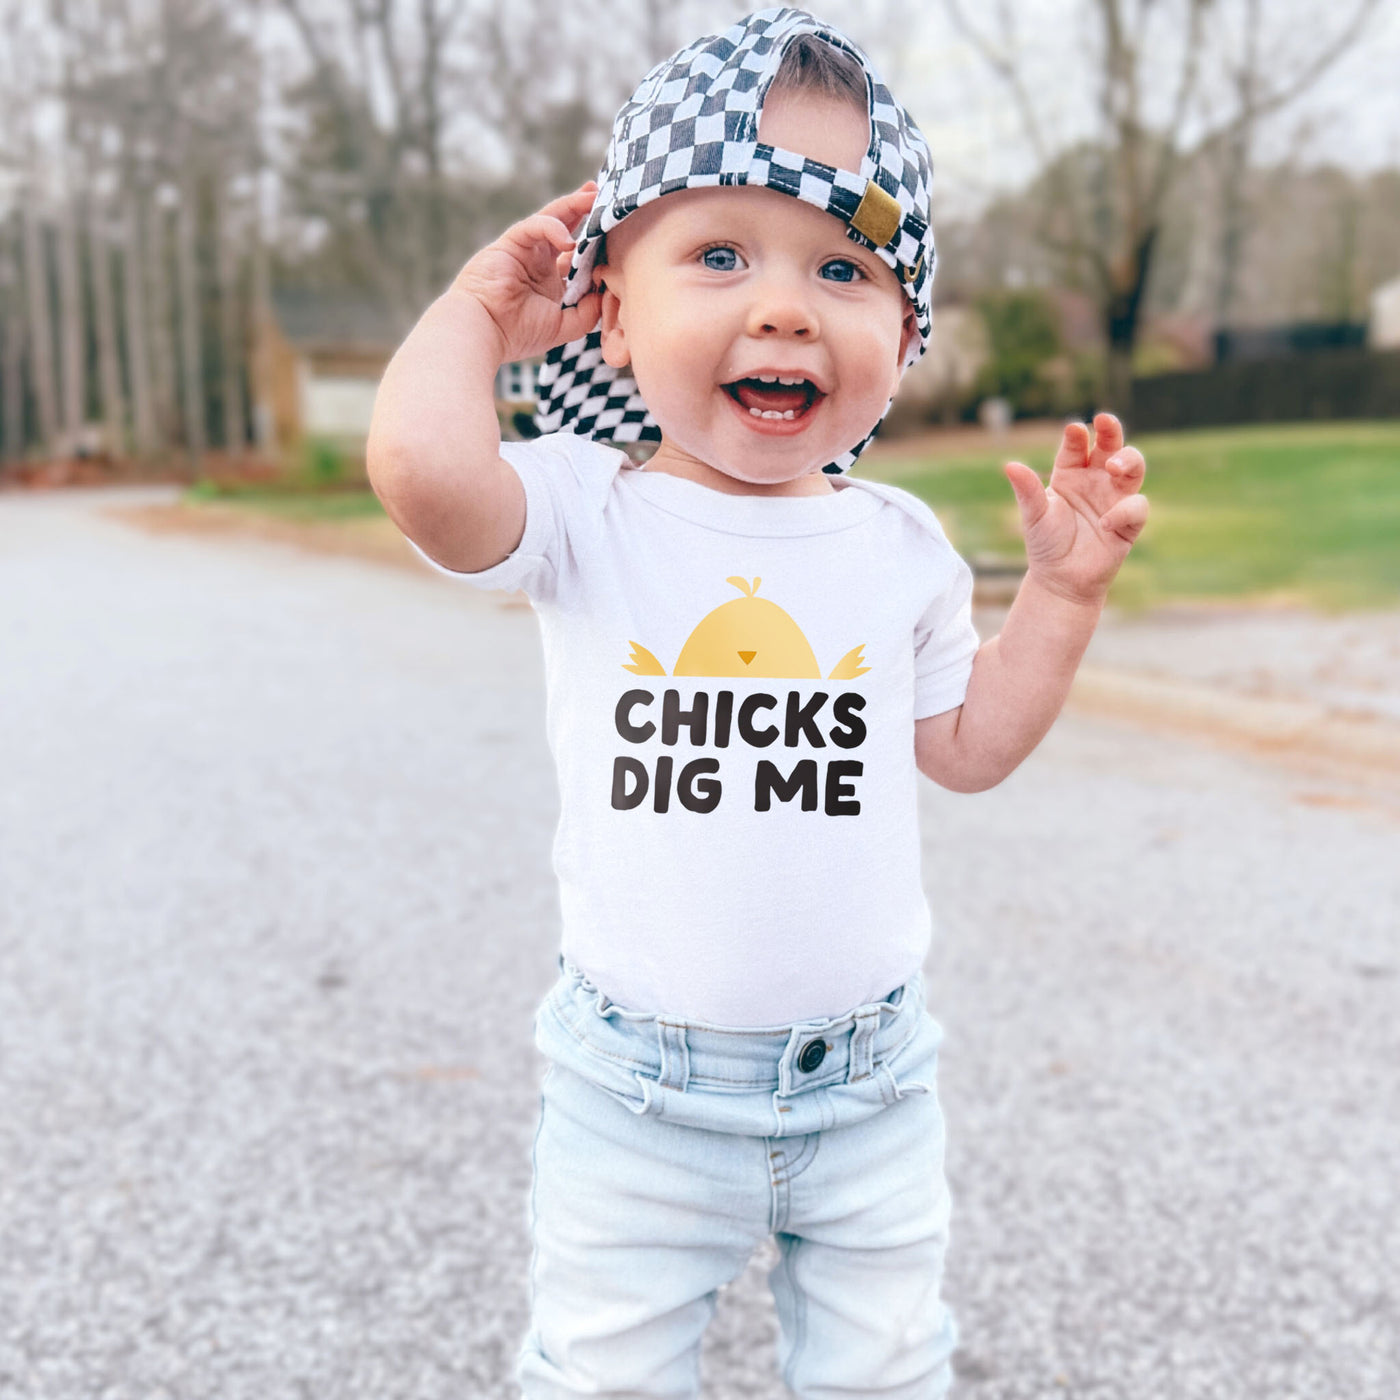 little boy wearing white short sleeve onesie bodysuit graphic tee with light yellow, orange and black chick digs me with baby chick design